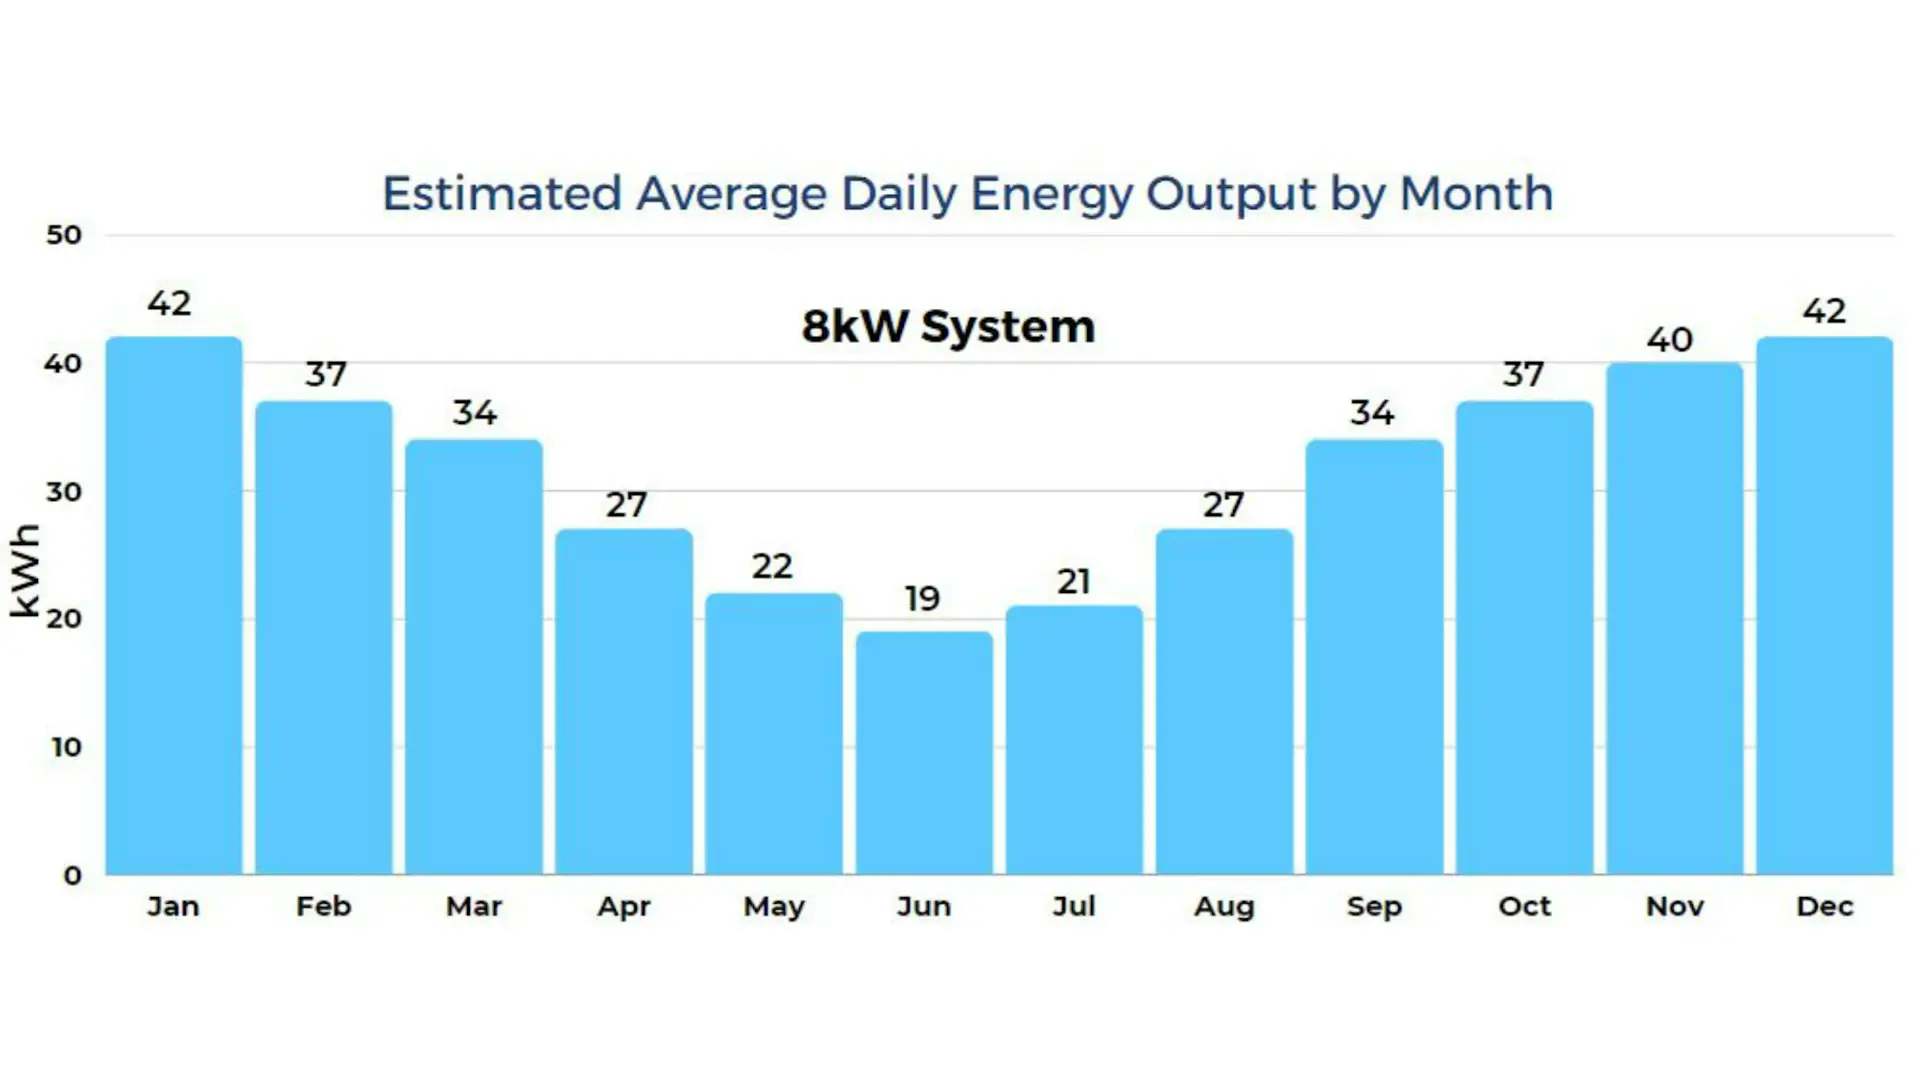 8kW solar panel system output summary by month